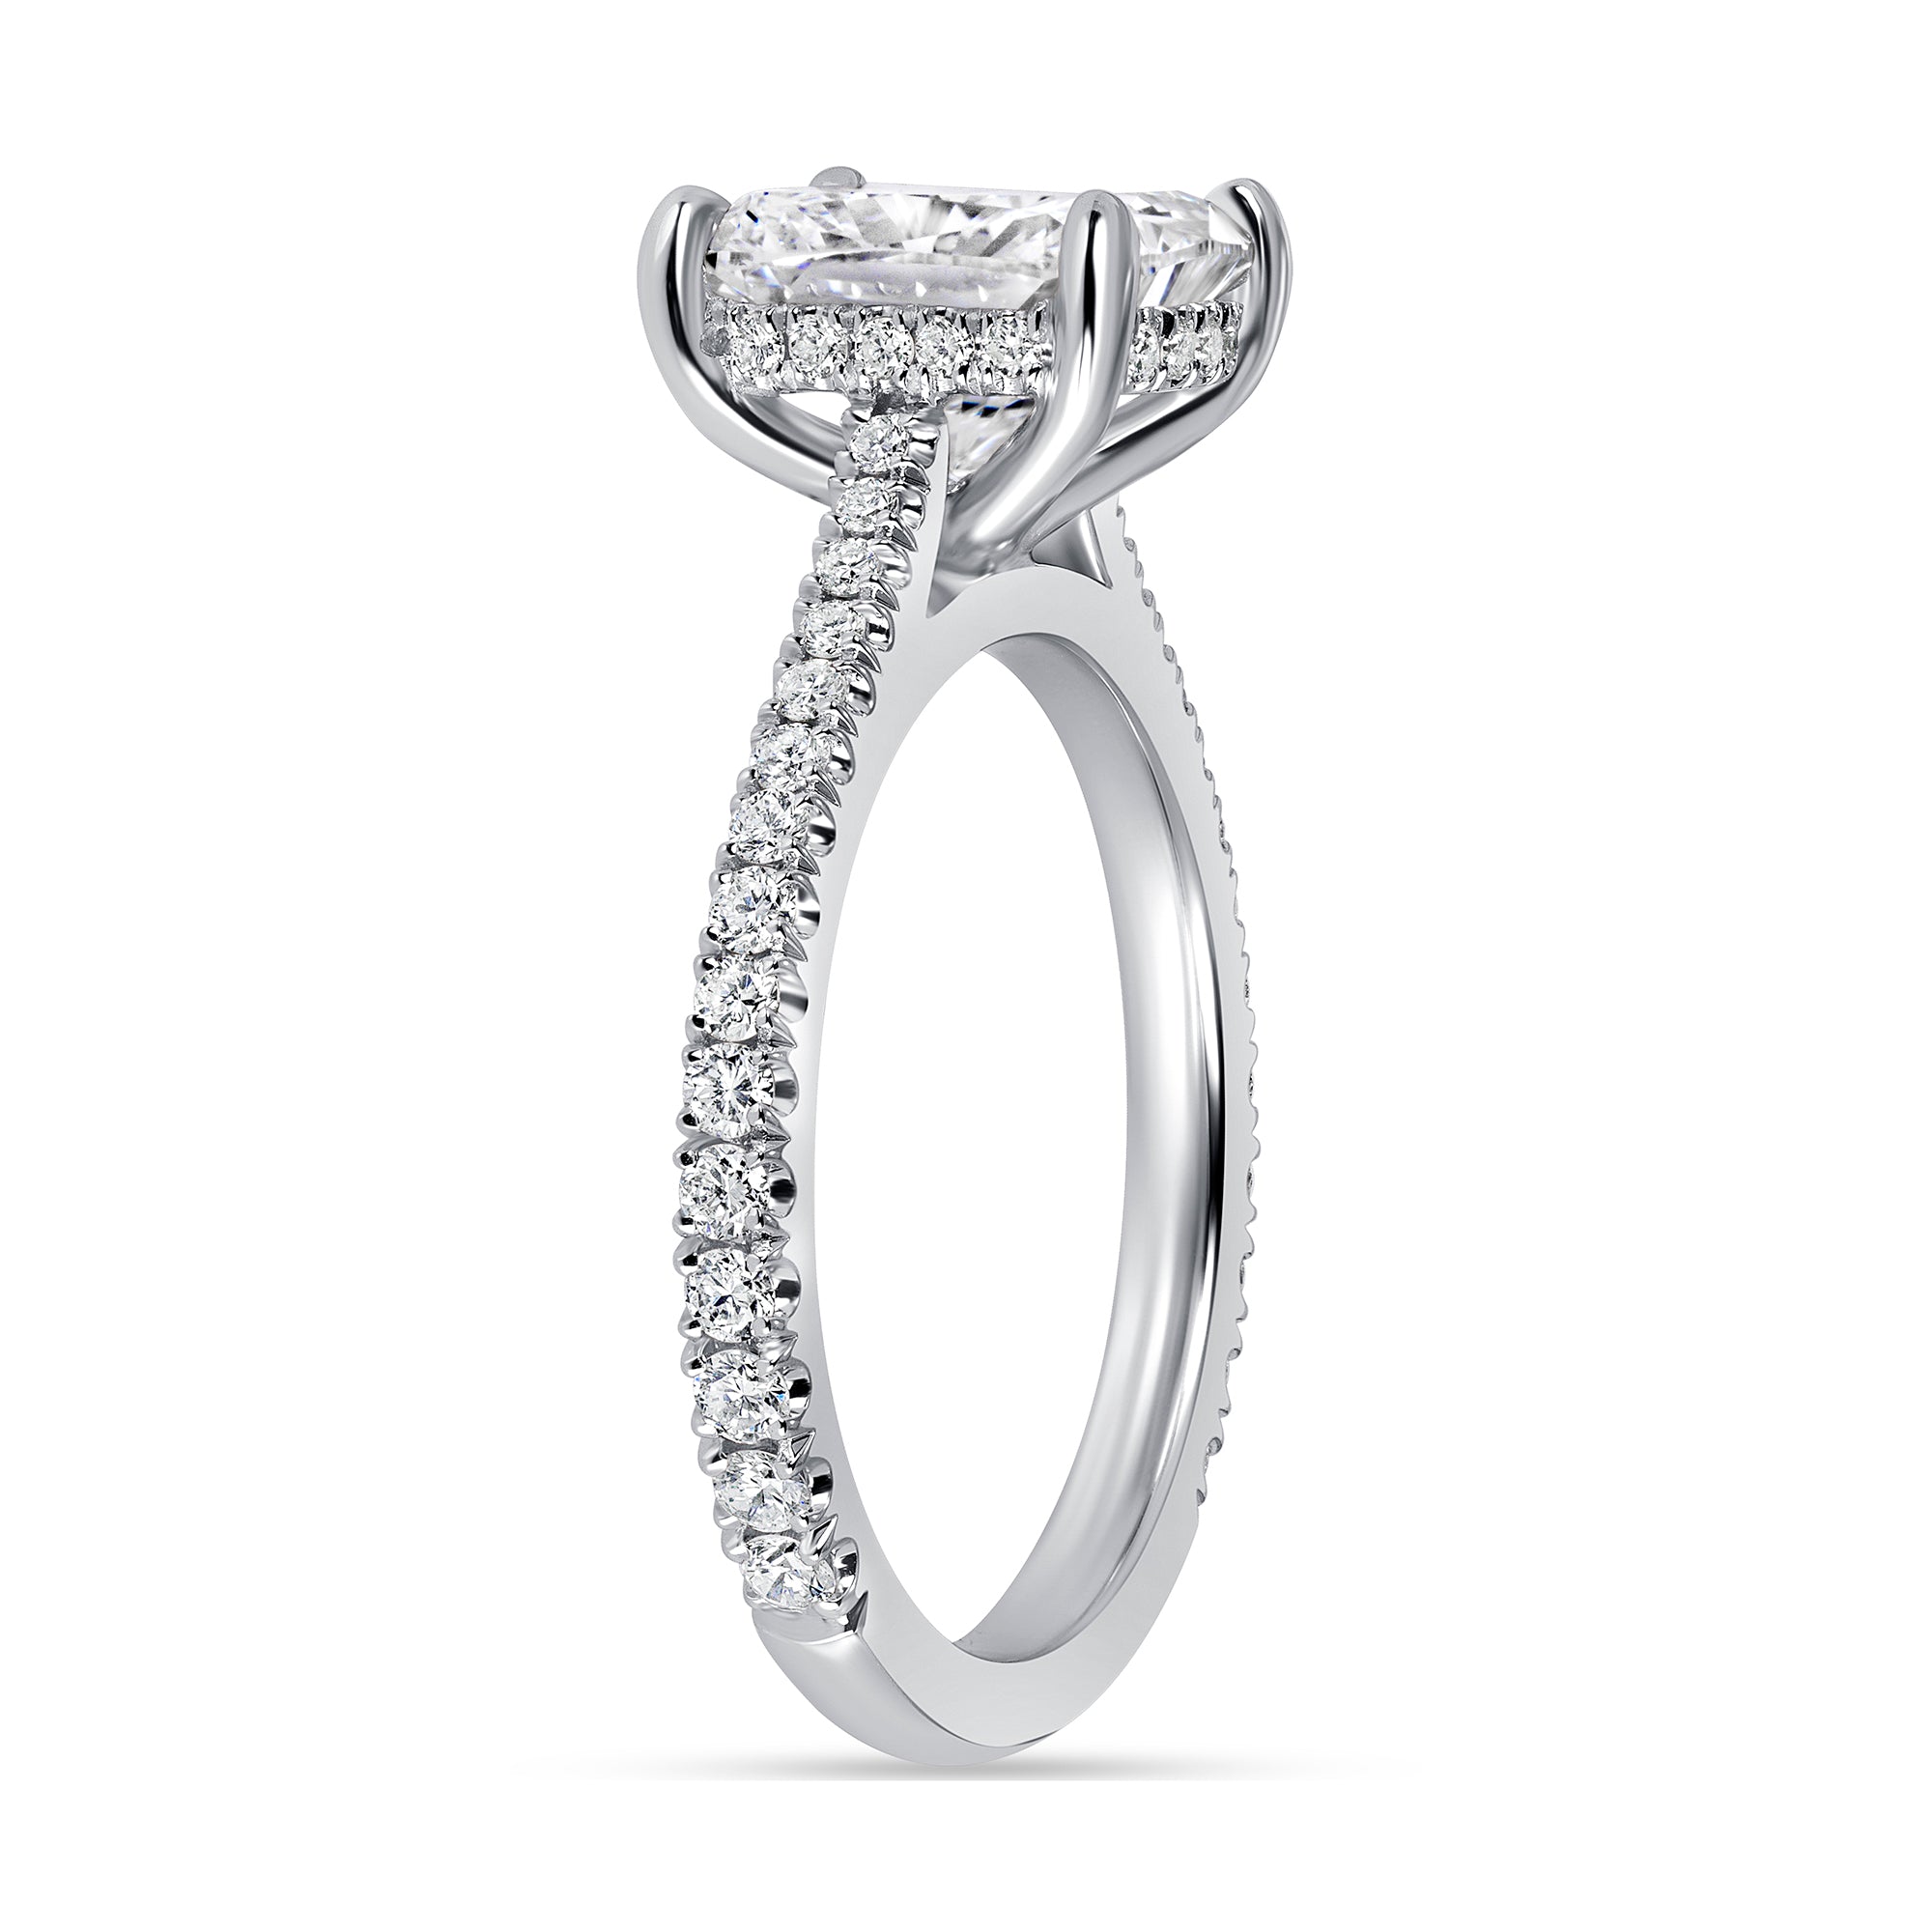 Radiant Cut Diamond Hidden Halo Ring with Pavé Band in Platinum